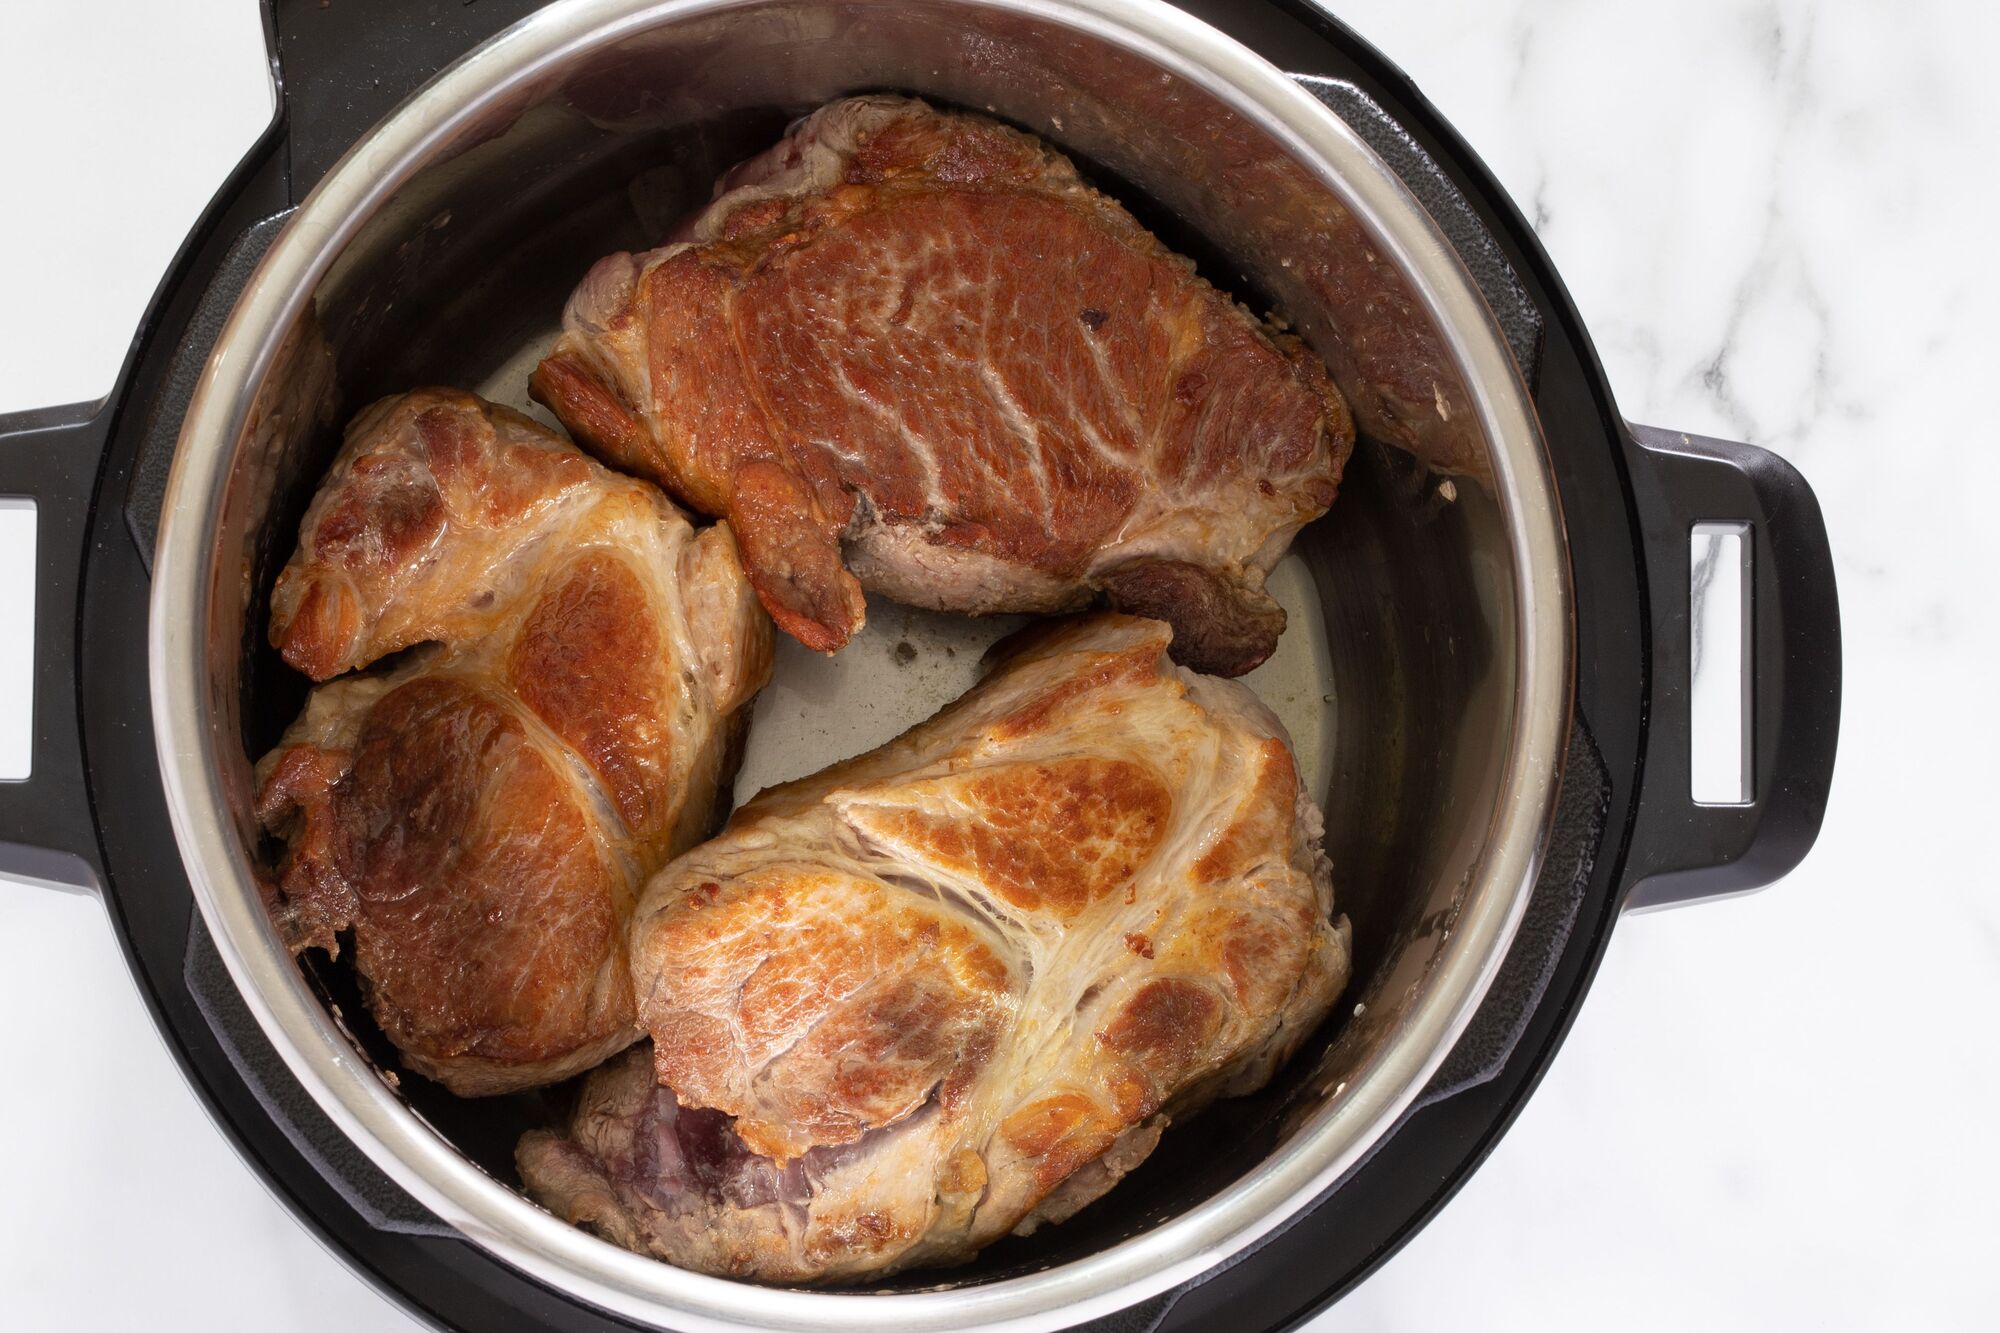 How Long To Cook A Frozen Roast In An Electric Pressure Cooker